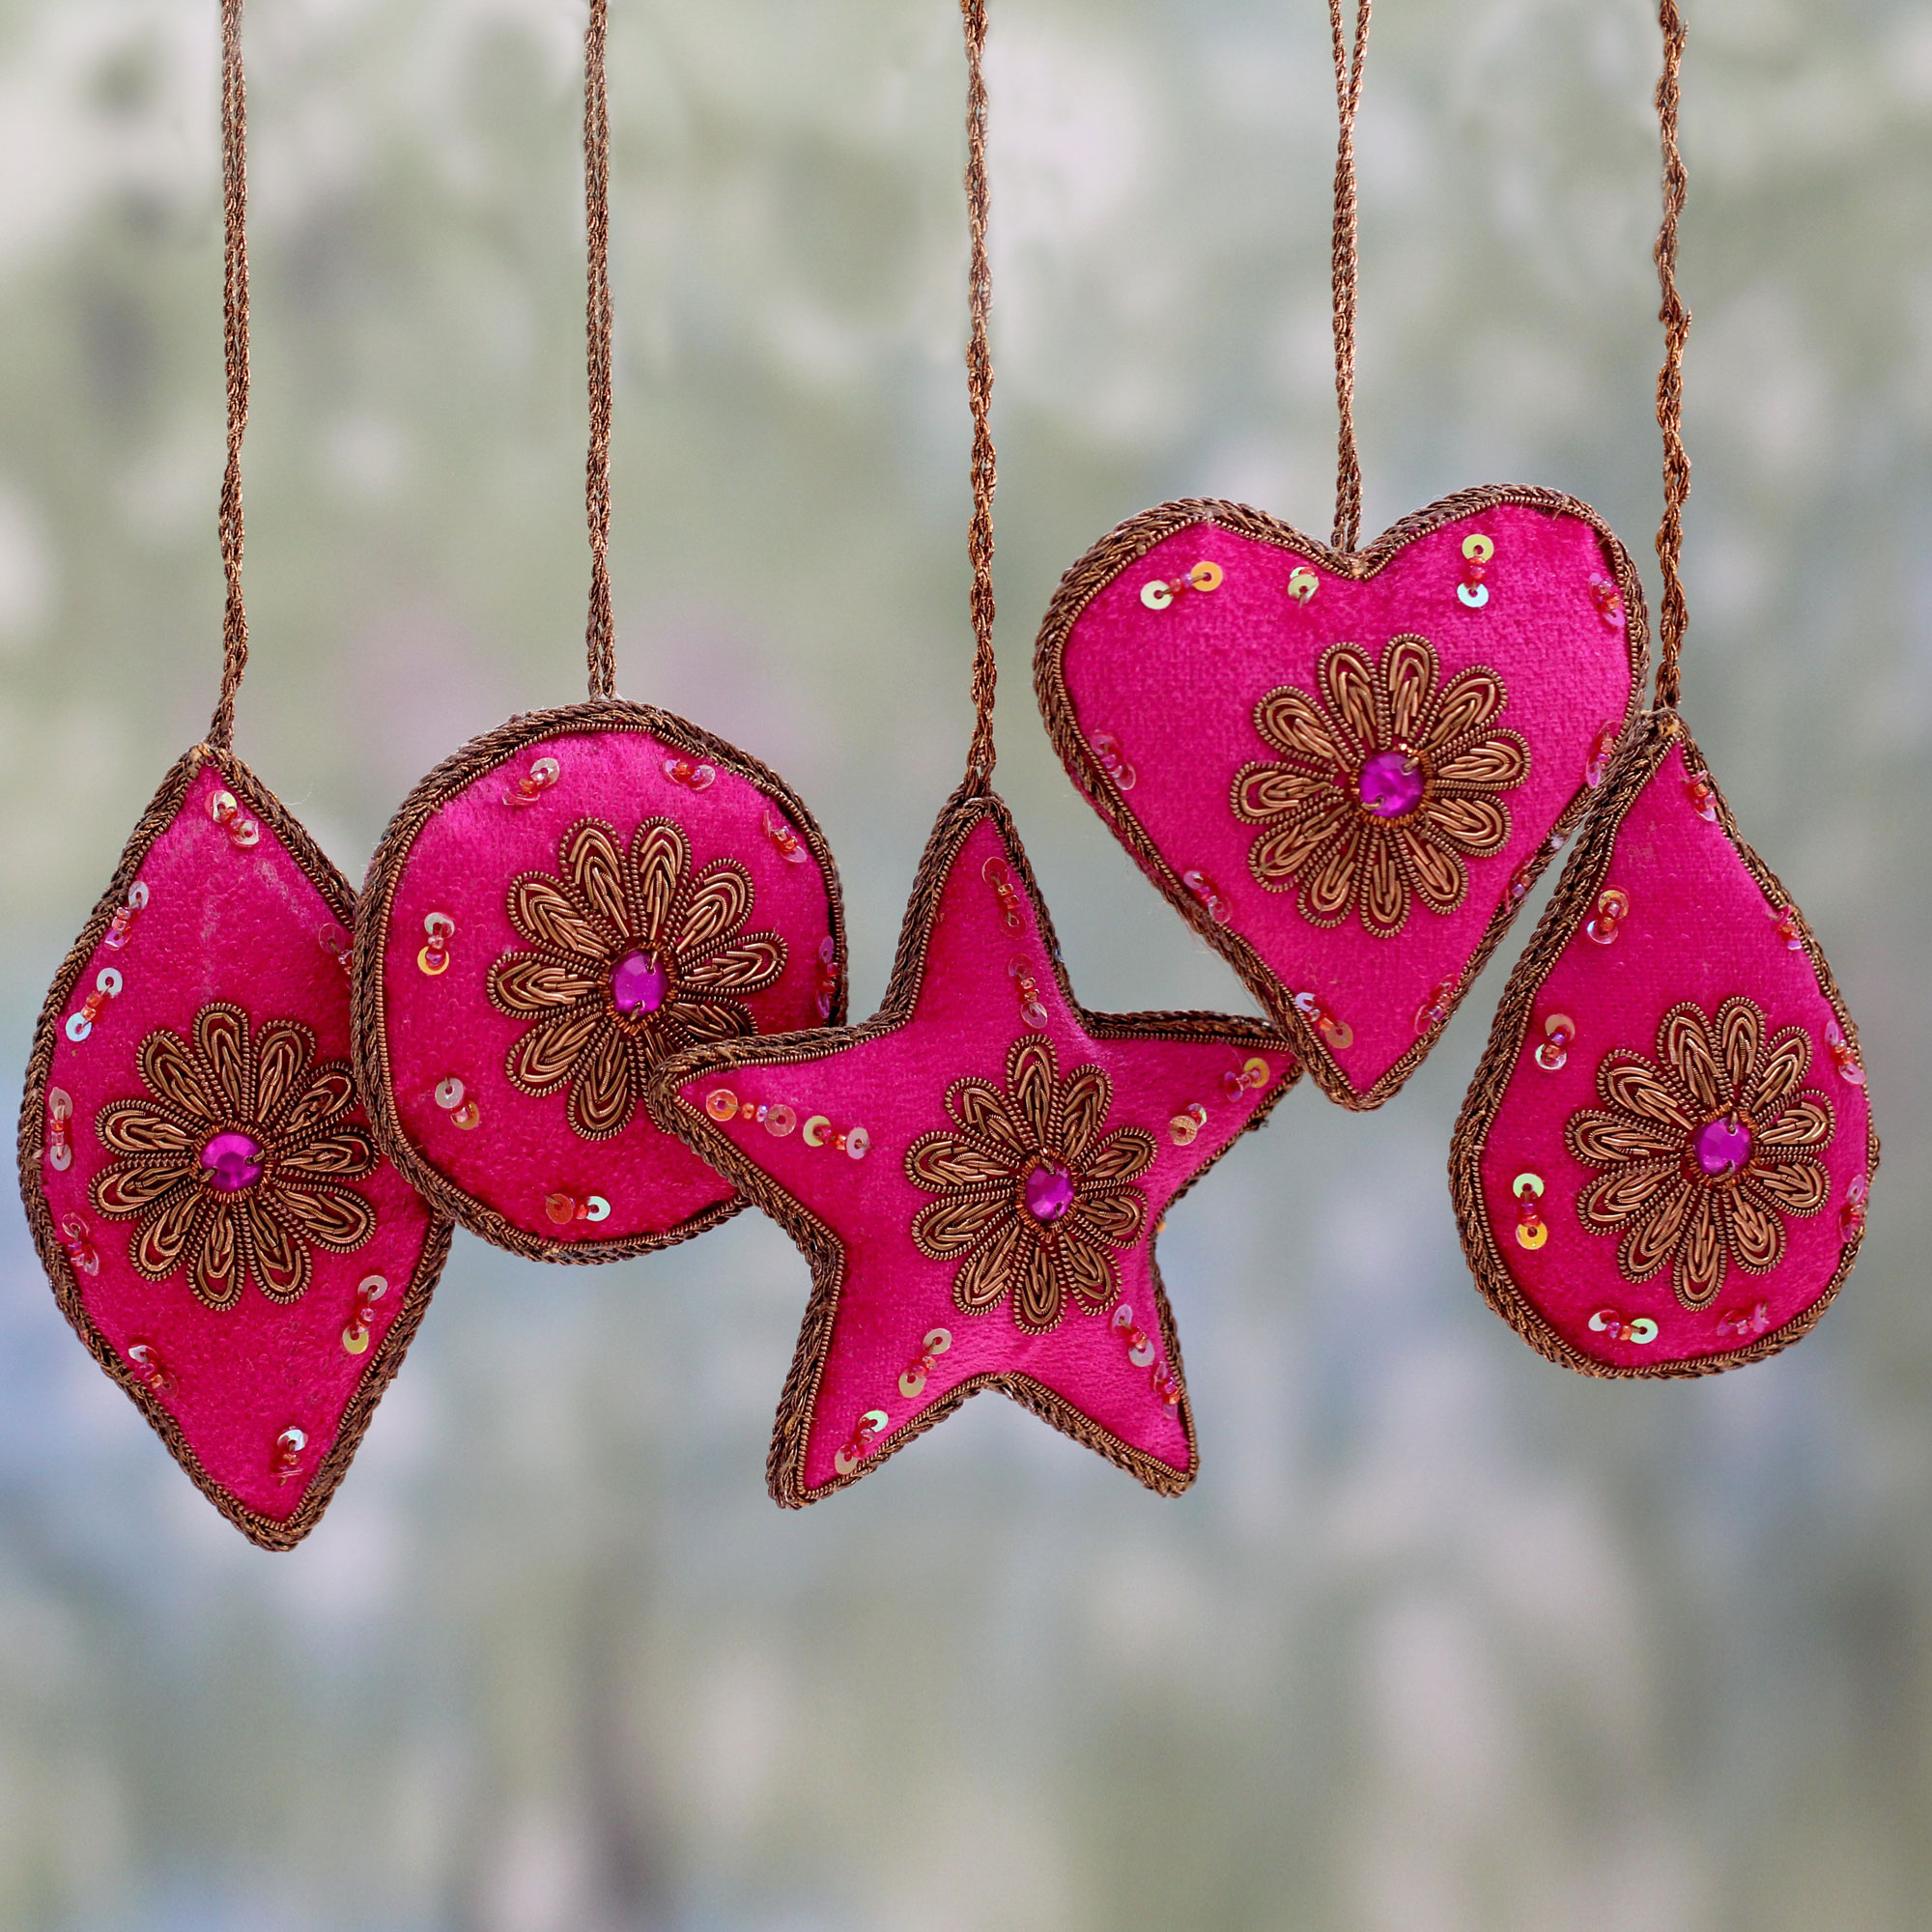 UNICEF Market | 5 Embroidered Velvet Christmas Ornaments Beads and ...